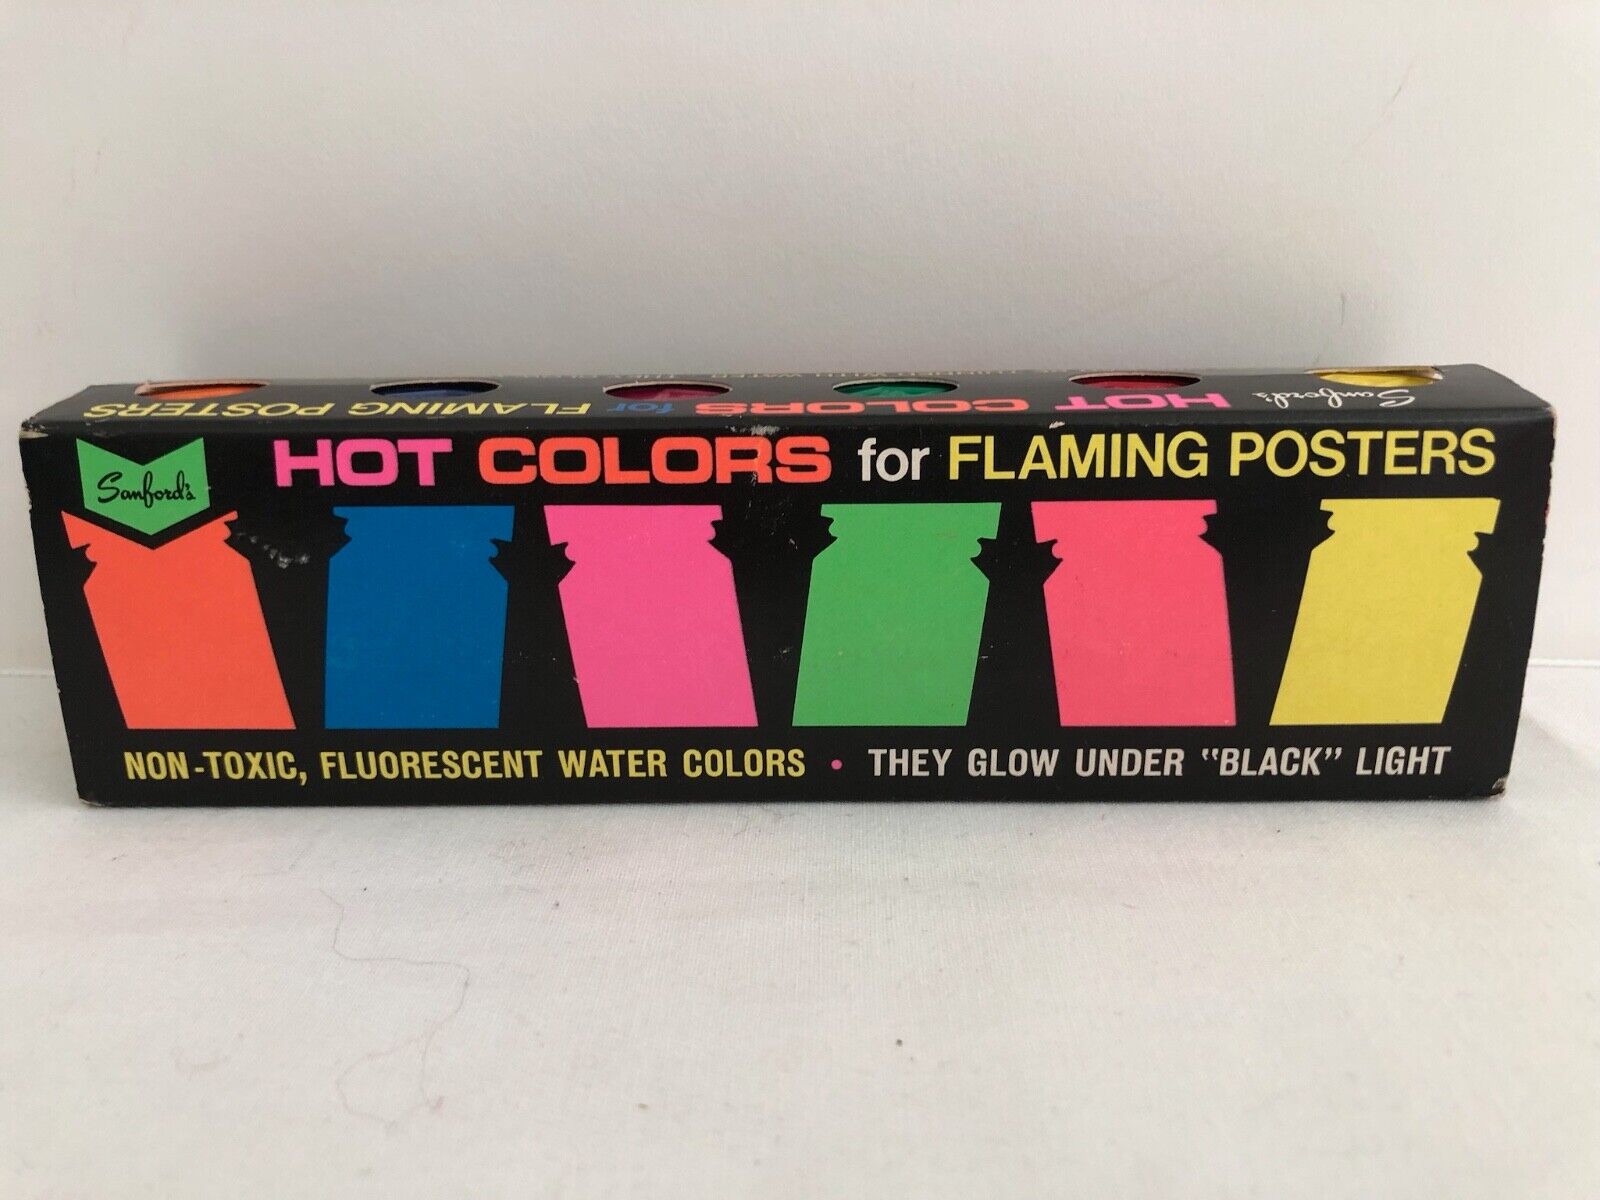 Vintage 1970s Sanford\'s Hot Colors for Flaming Posters Paint NOS